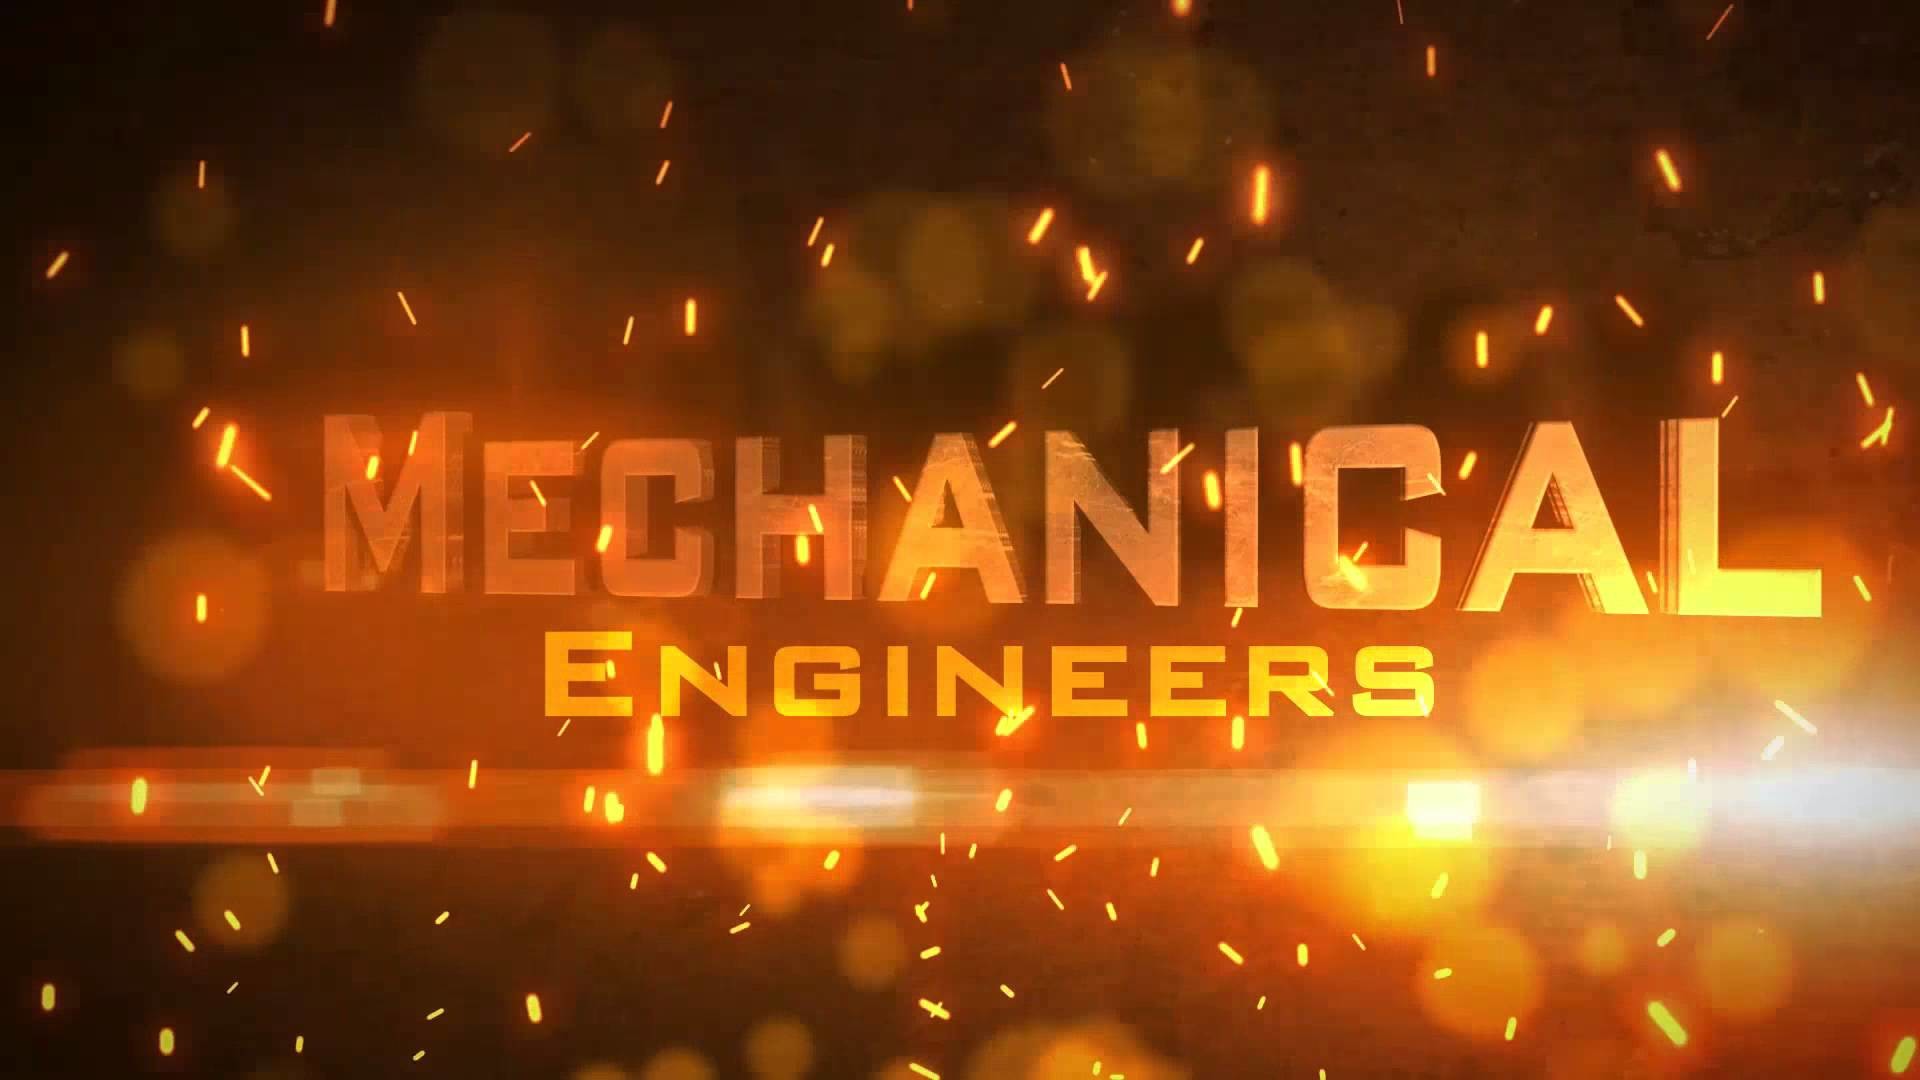 1920x1080 Check out this awesome Campaign - Mechanical Engineering Tees from .